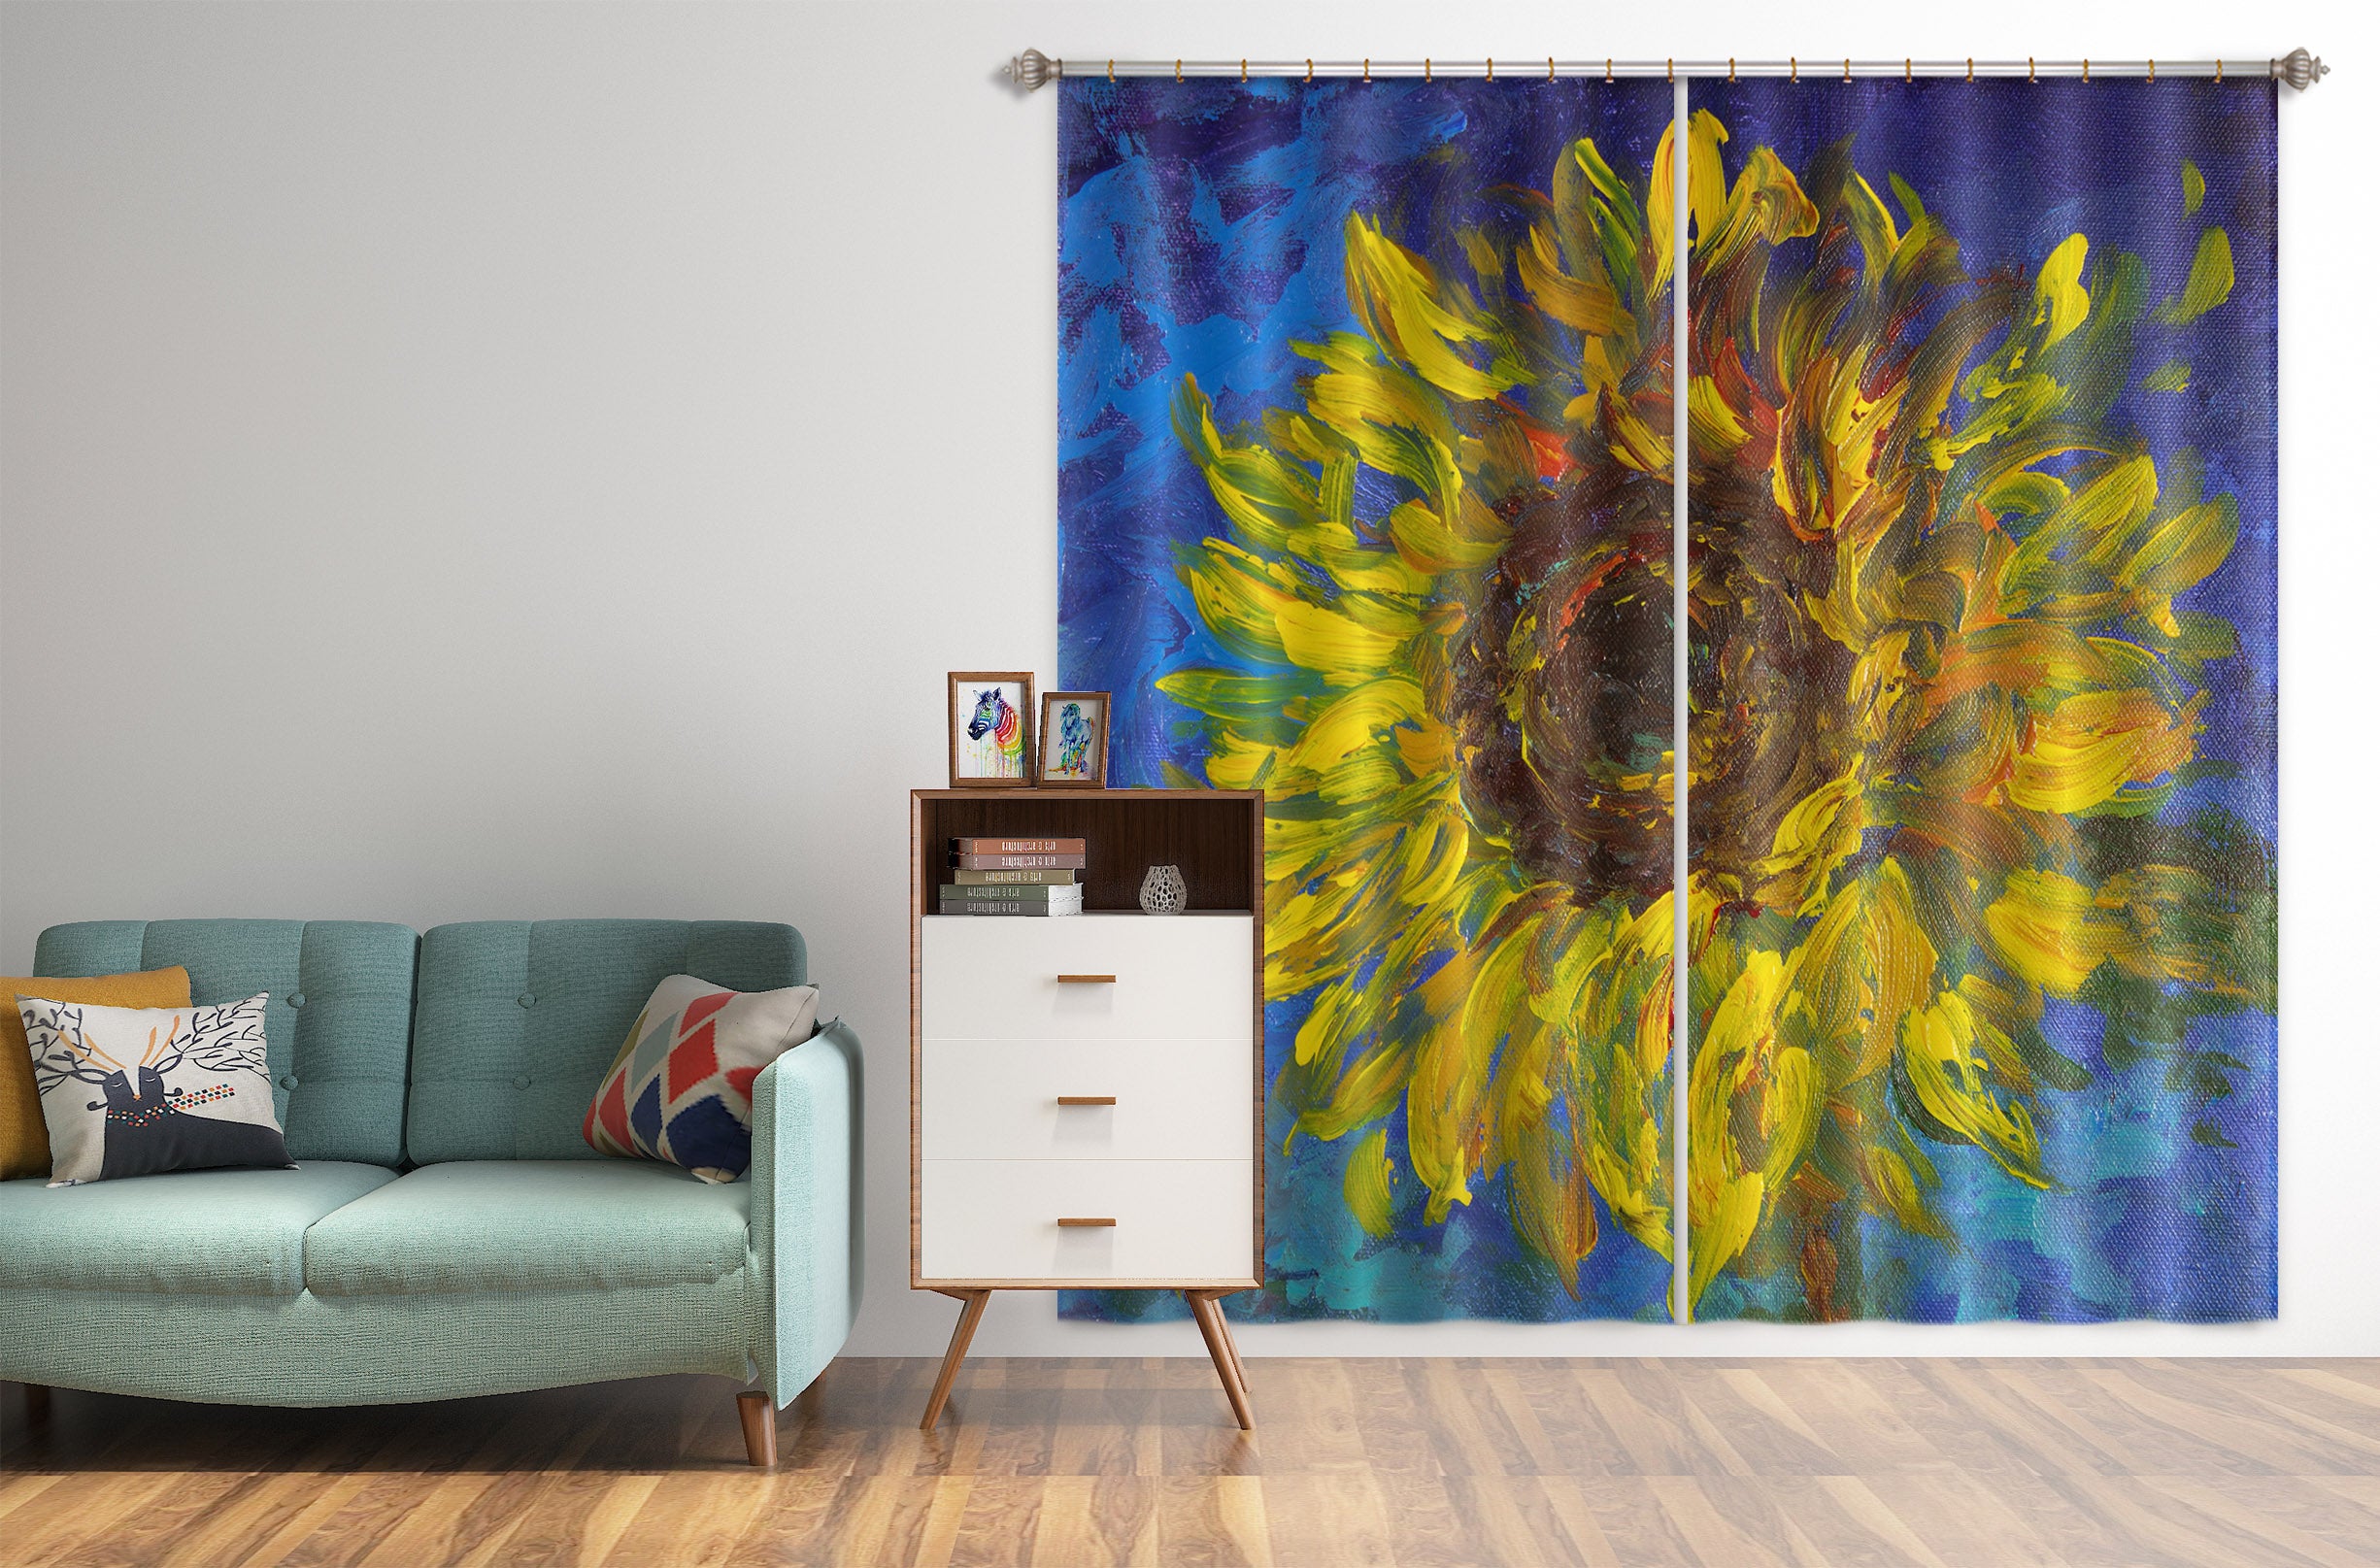 3D Sunflower Painting 2196 Debi Coules Curtain Curtains Drapes